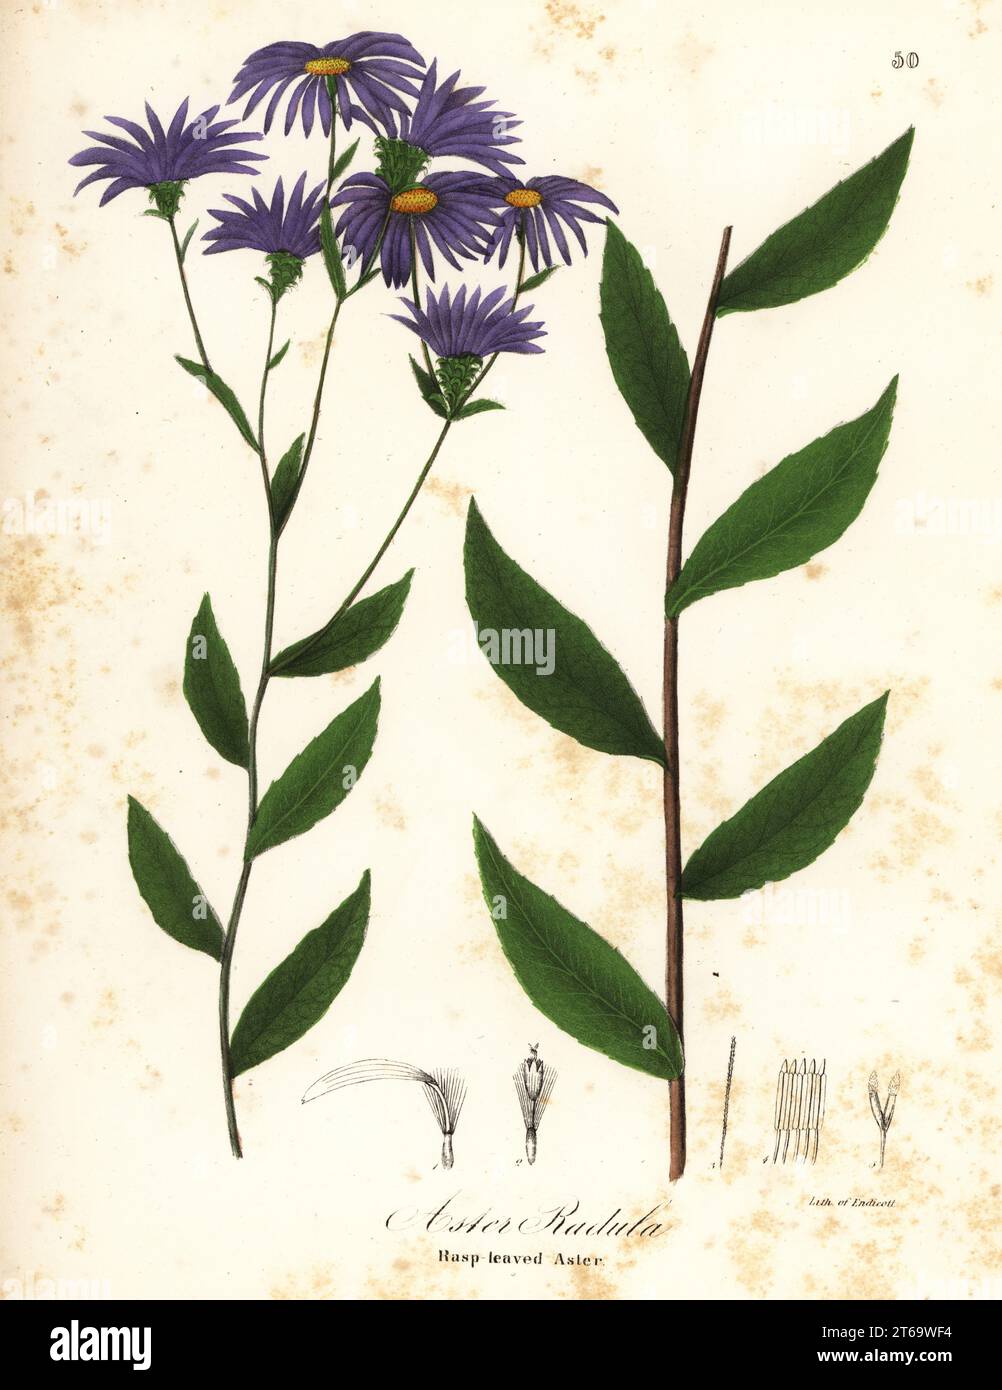 Low rough aster or rough wood aster, Eurybia radula (Rasp-leaved aster, Aster radula). Handcoloured lithograph by Endicott after a botanical illustration from John Torreys A Flora of the State of New York, Carroll and Cook, Albany, 1843. The plates drawn by John Torrey, Agnes Mitchell, Elizabeth Paoley and Swinton. John Torrey was an American botanist, chemist and physician 1796-1873. Stock Photo